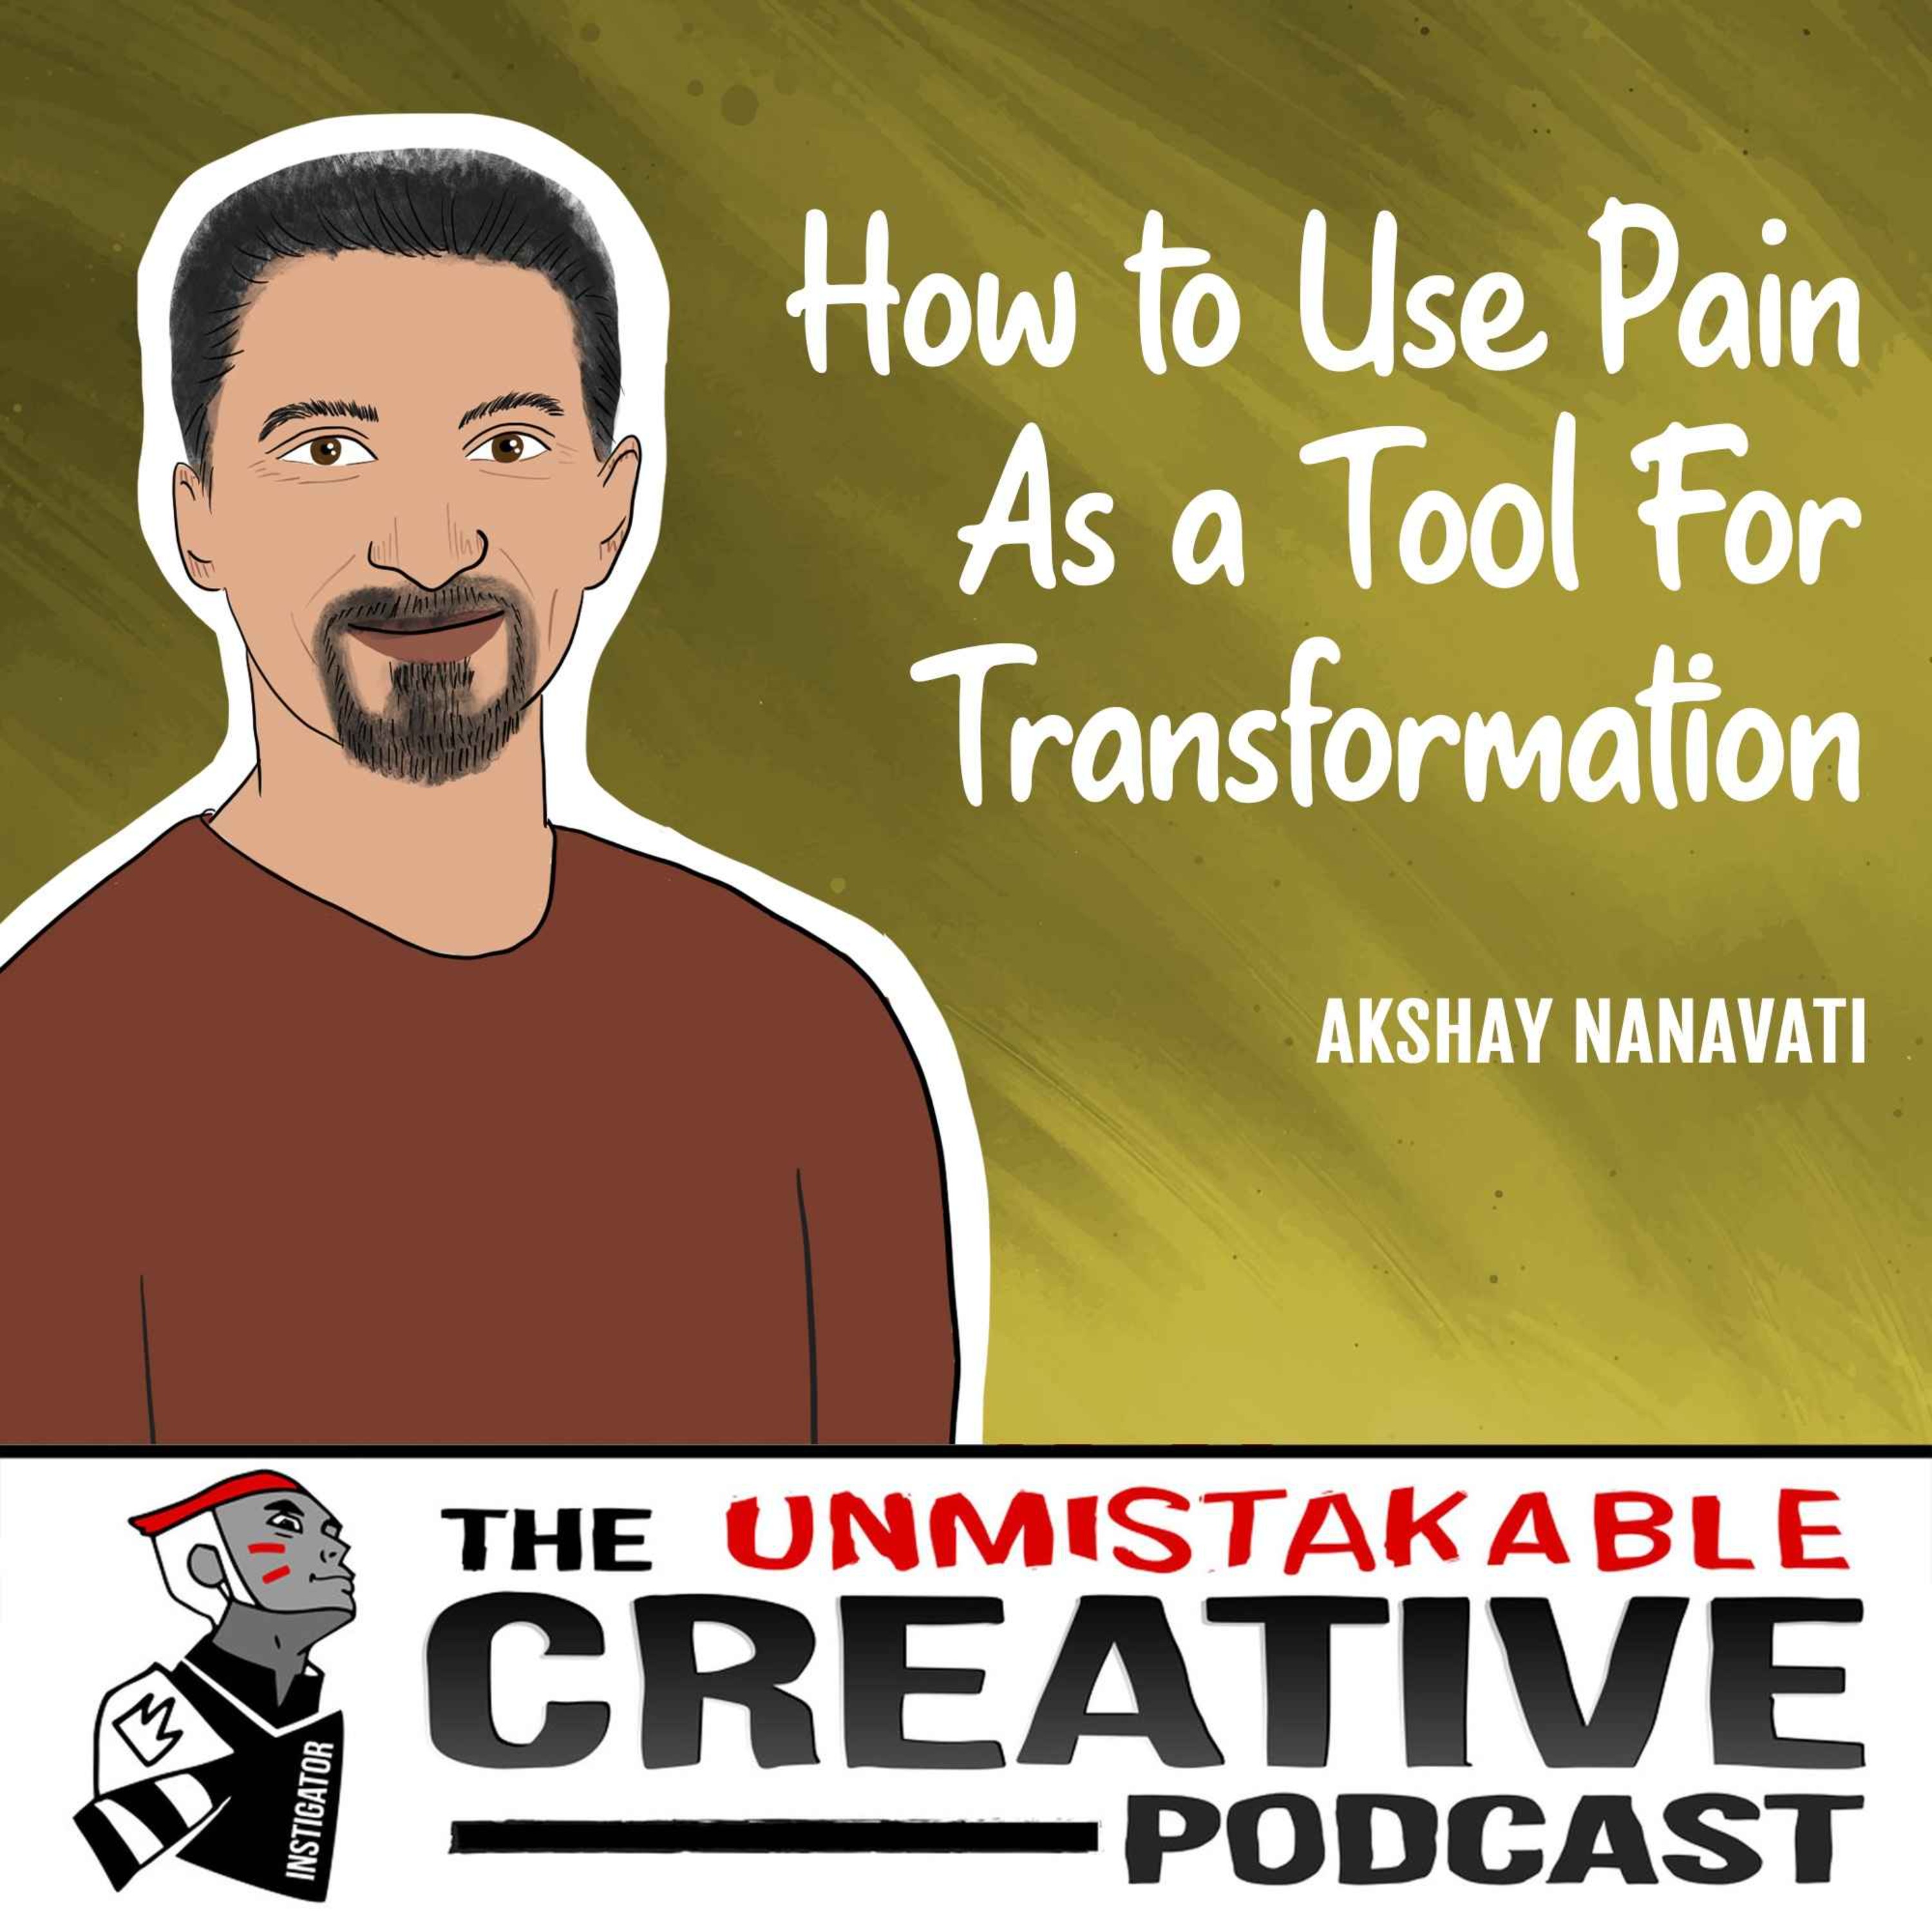 Akshay Nanavati | How to Use Pain as a Tool for Transformation